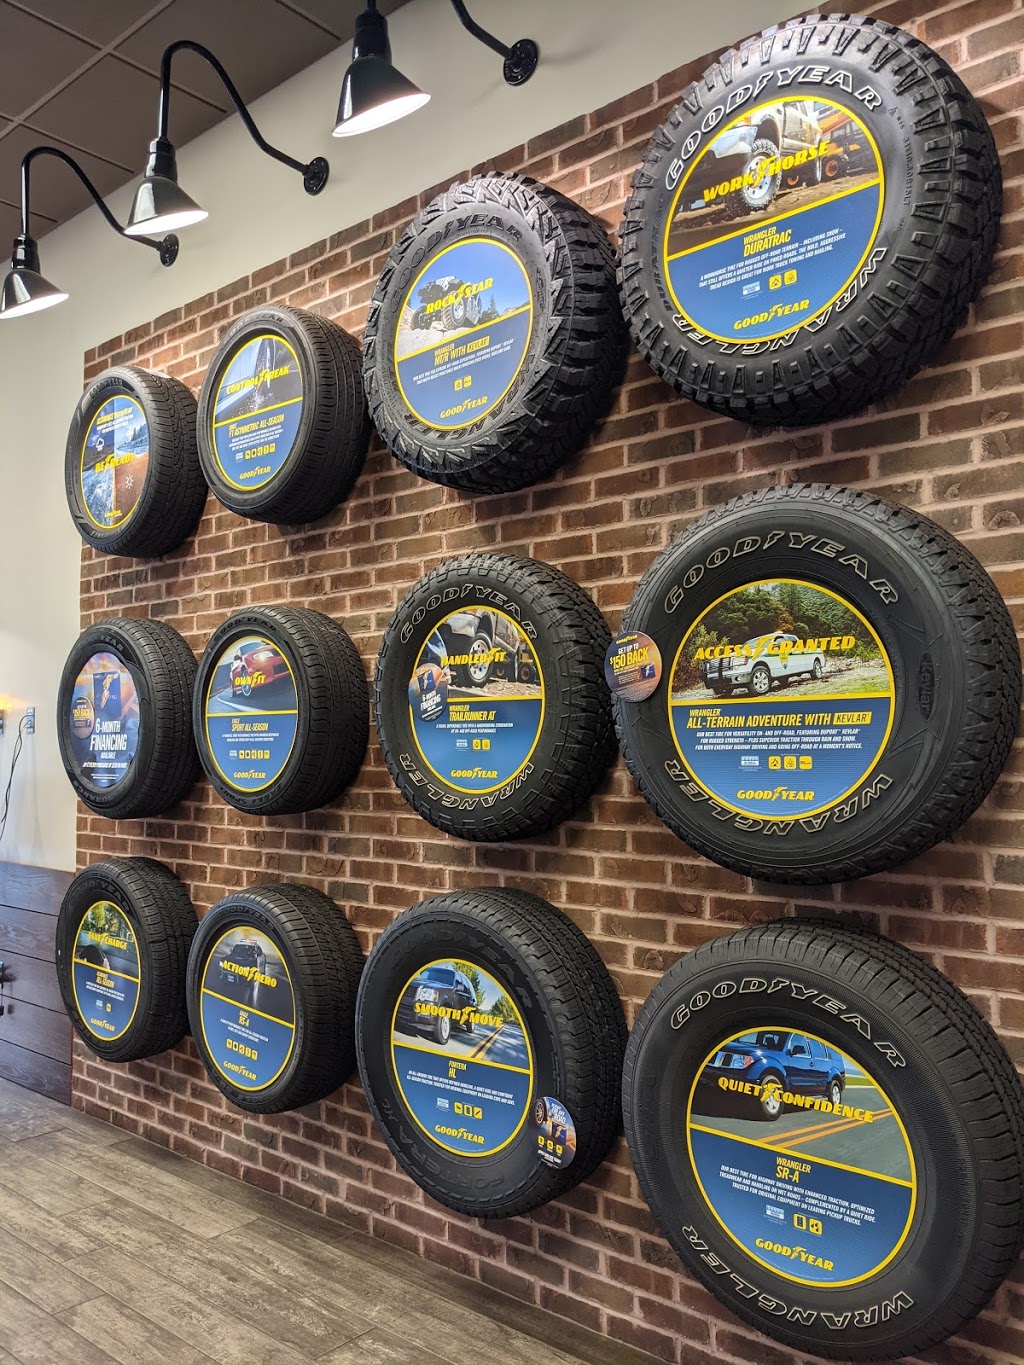 Goodyear Auto Service | 16180 Pearl Rd, Strongsville, OH 44136 | Phone: (440) 238-5001